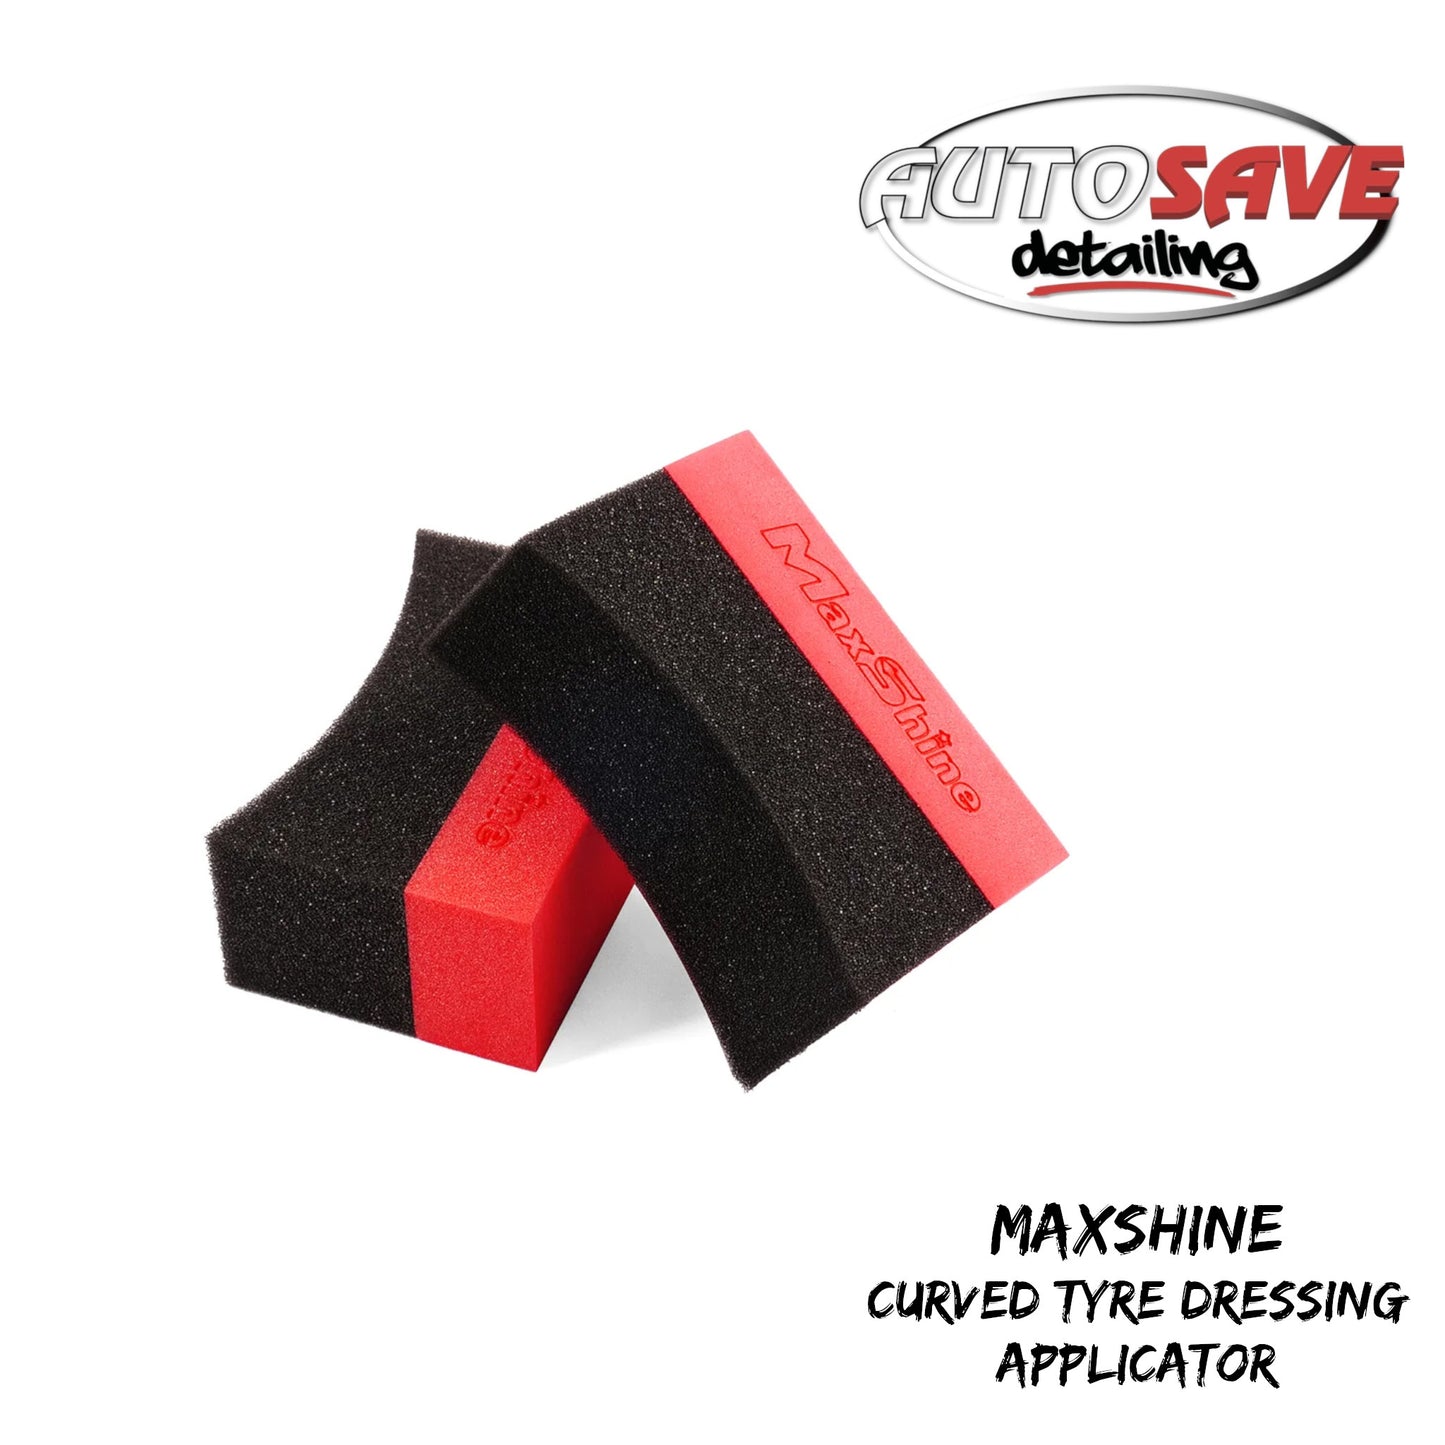 Maxshine Curved Tyre Dressing Applicator - 4 Pack